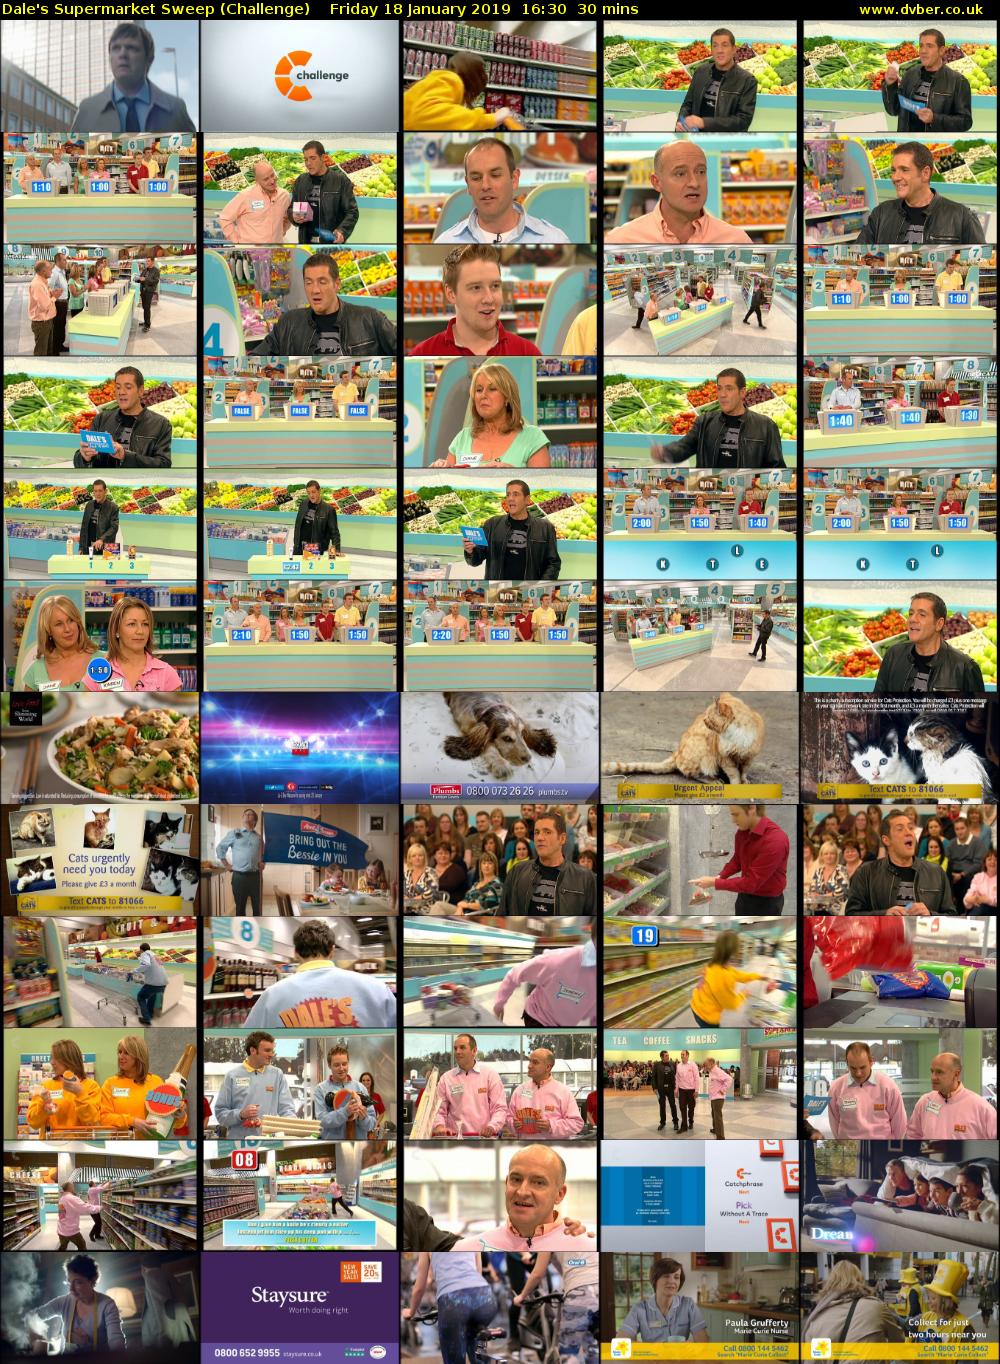 Dale's Supermarket Sweep (Challenge) Friday 18 January 2019 16:30 - 17:00